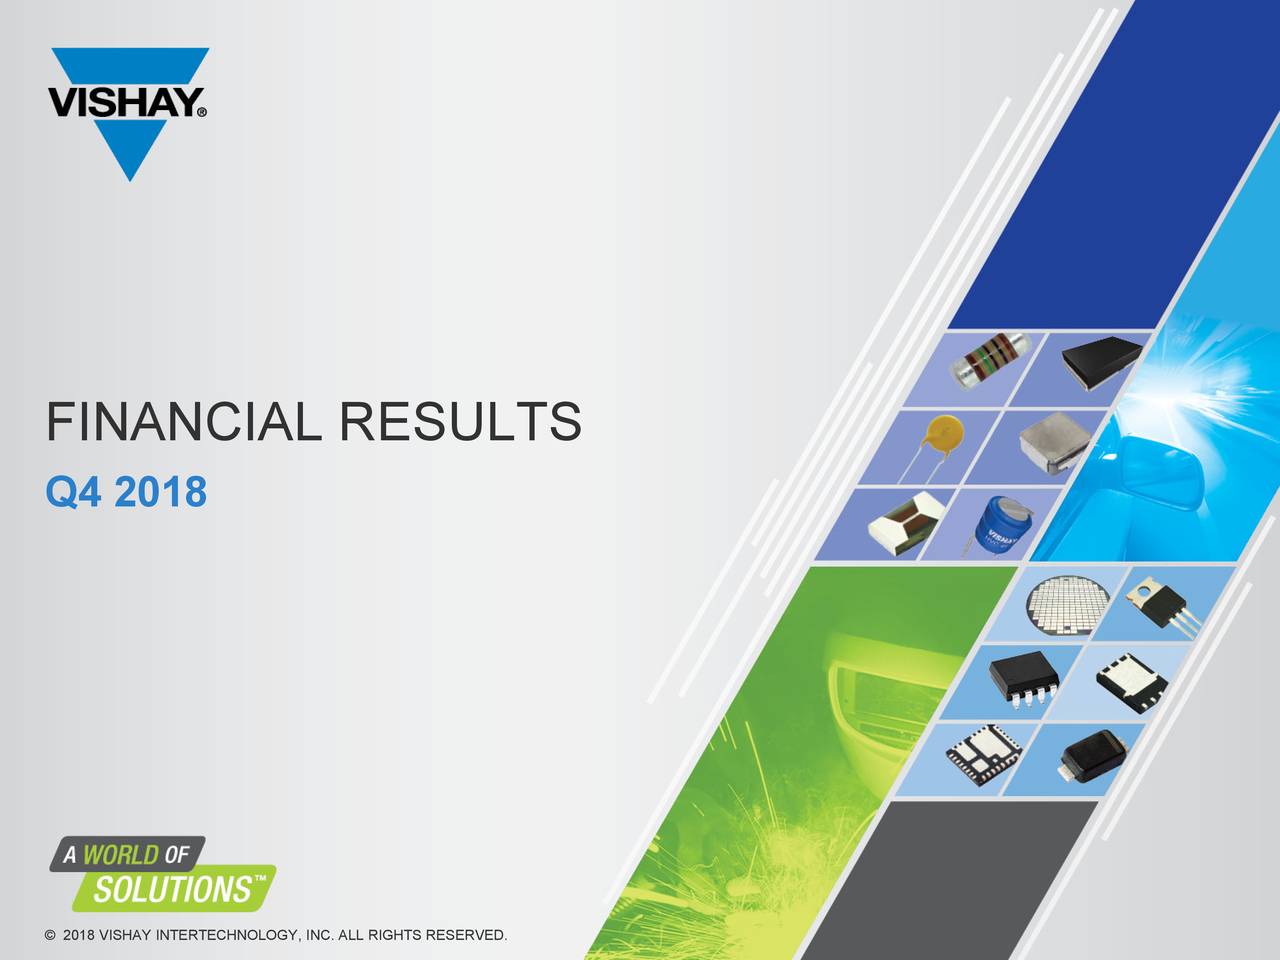 FINANCIAL RESULTS